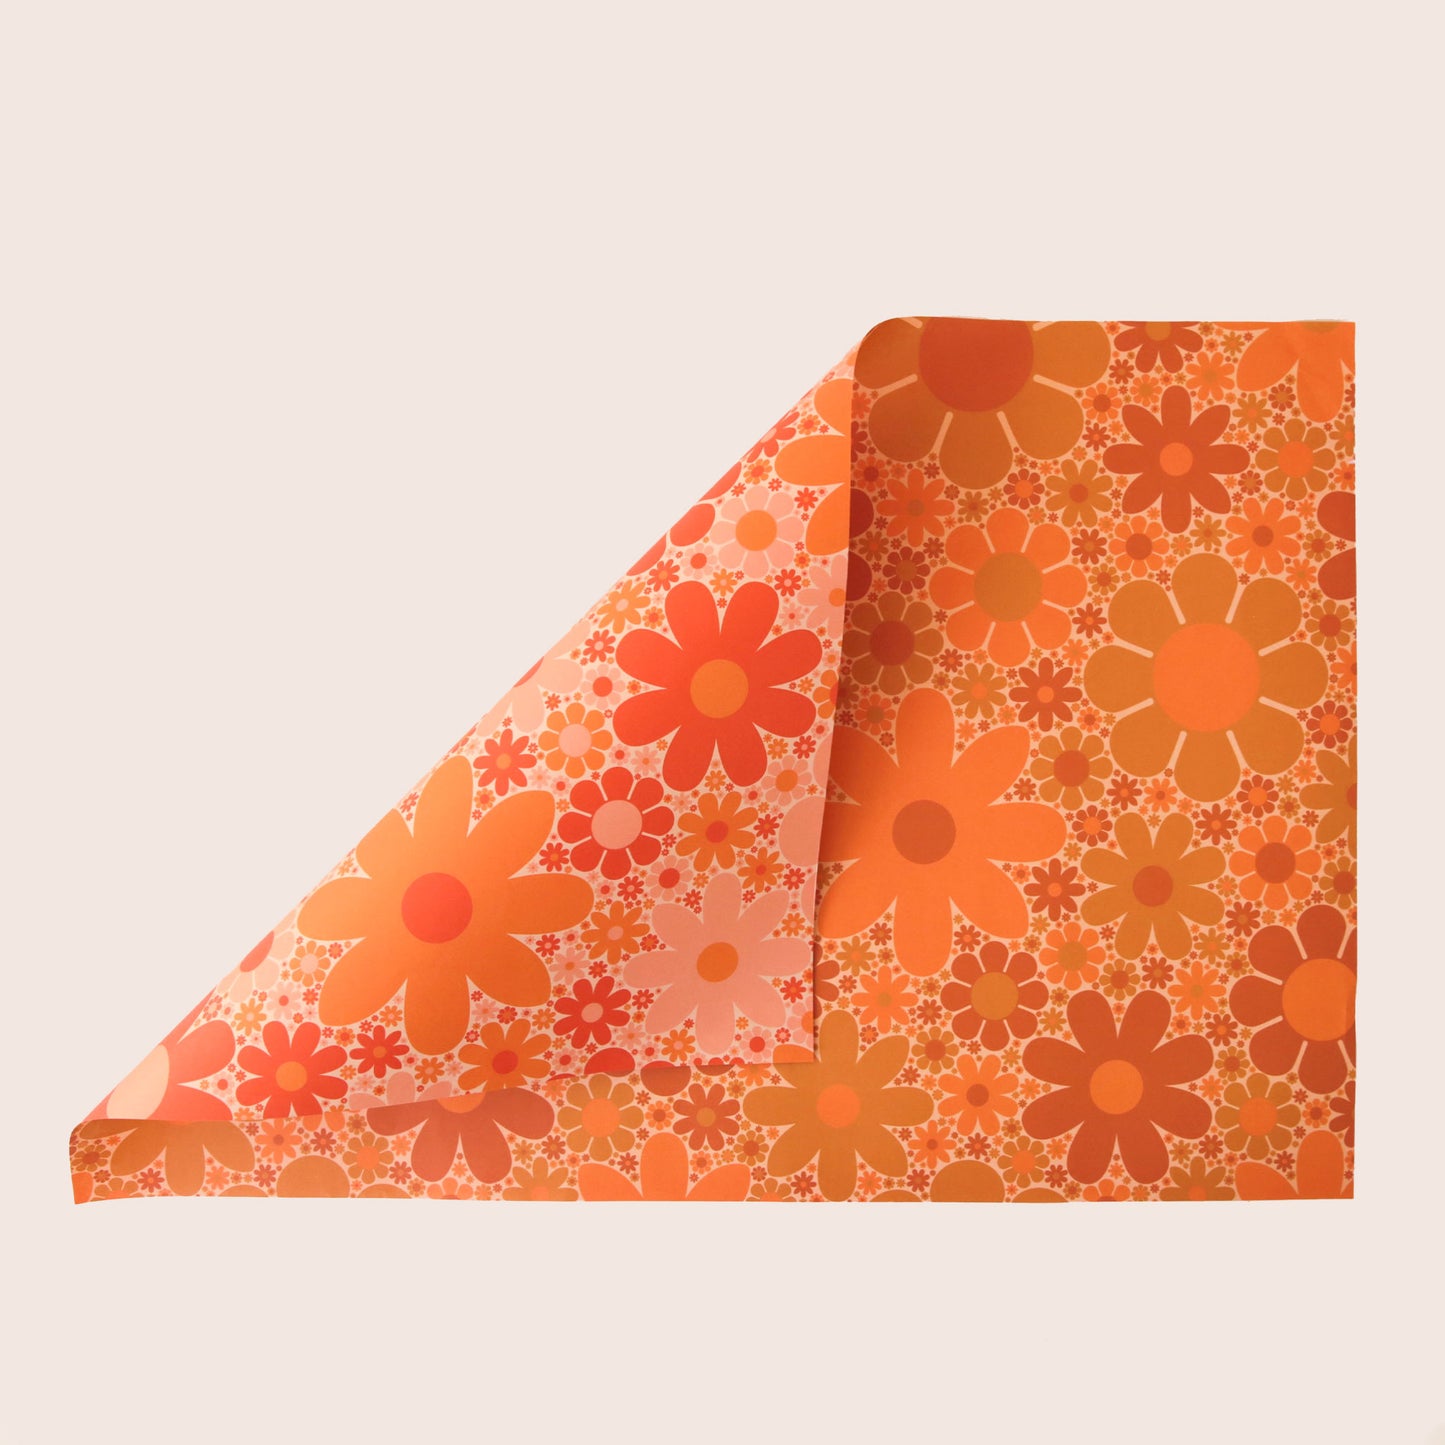 Sheet of wrapping paper filled with orange and yellow flower print. The sheet is bent forward, revealing the other side of the wrapping paper. The back side is covered in the same floral print in pink and oranges.